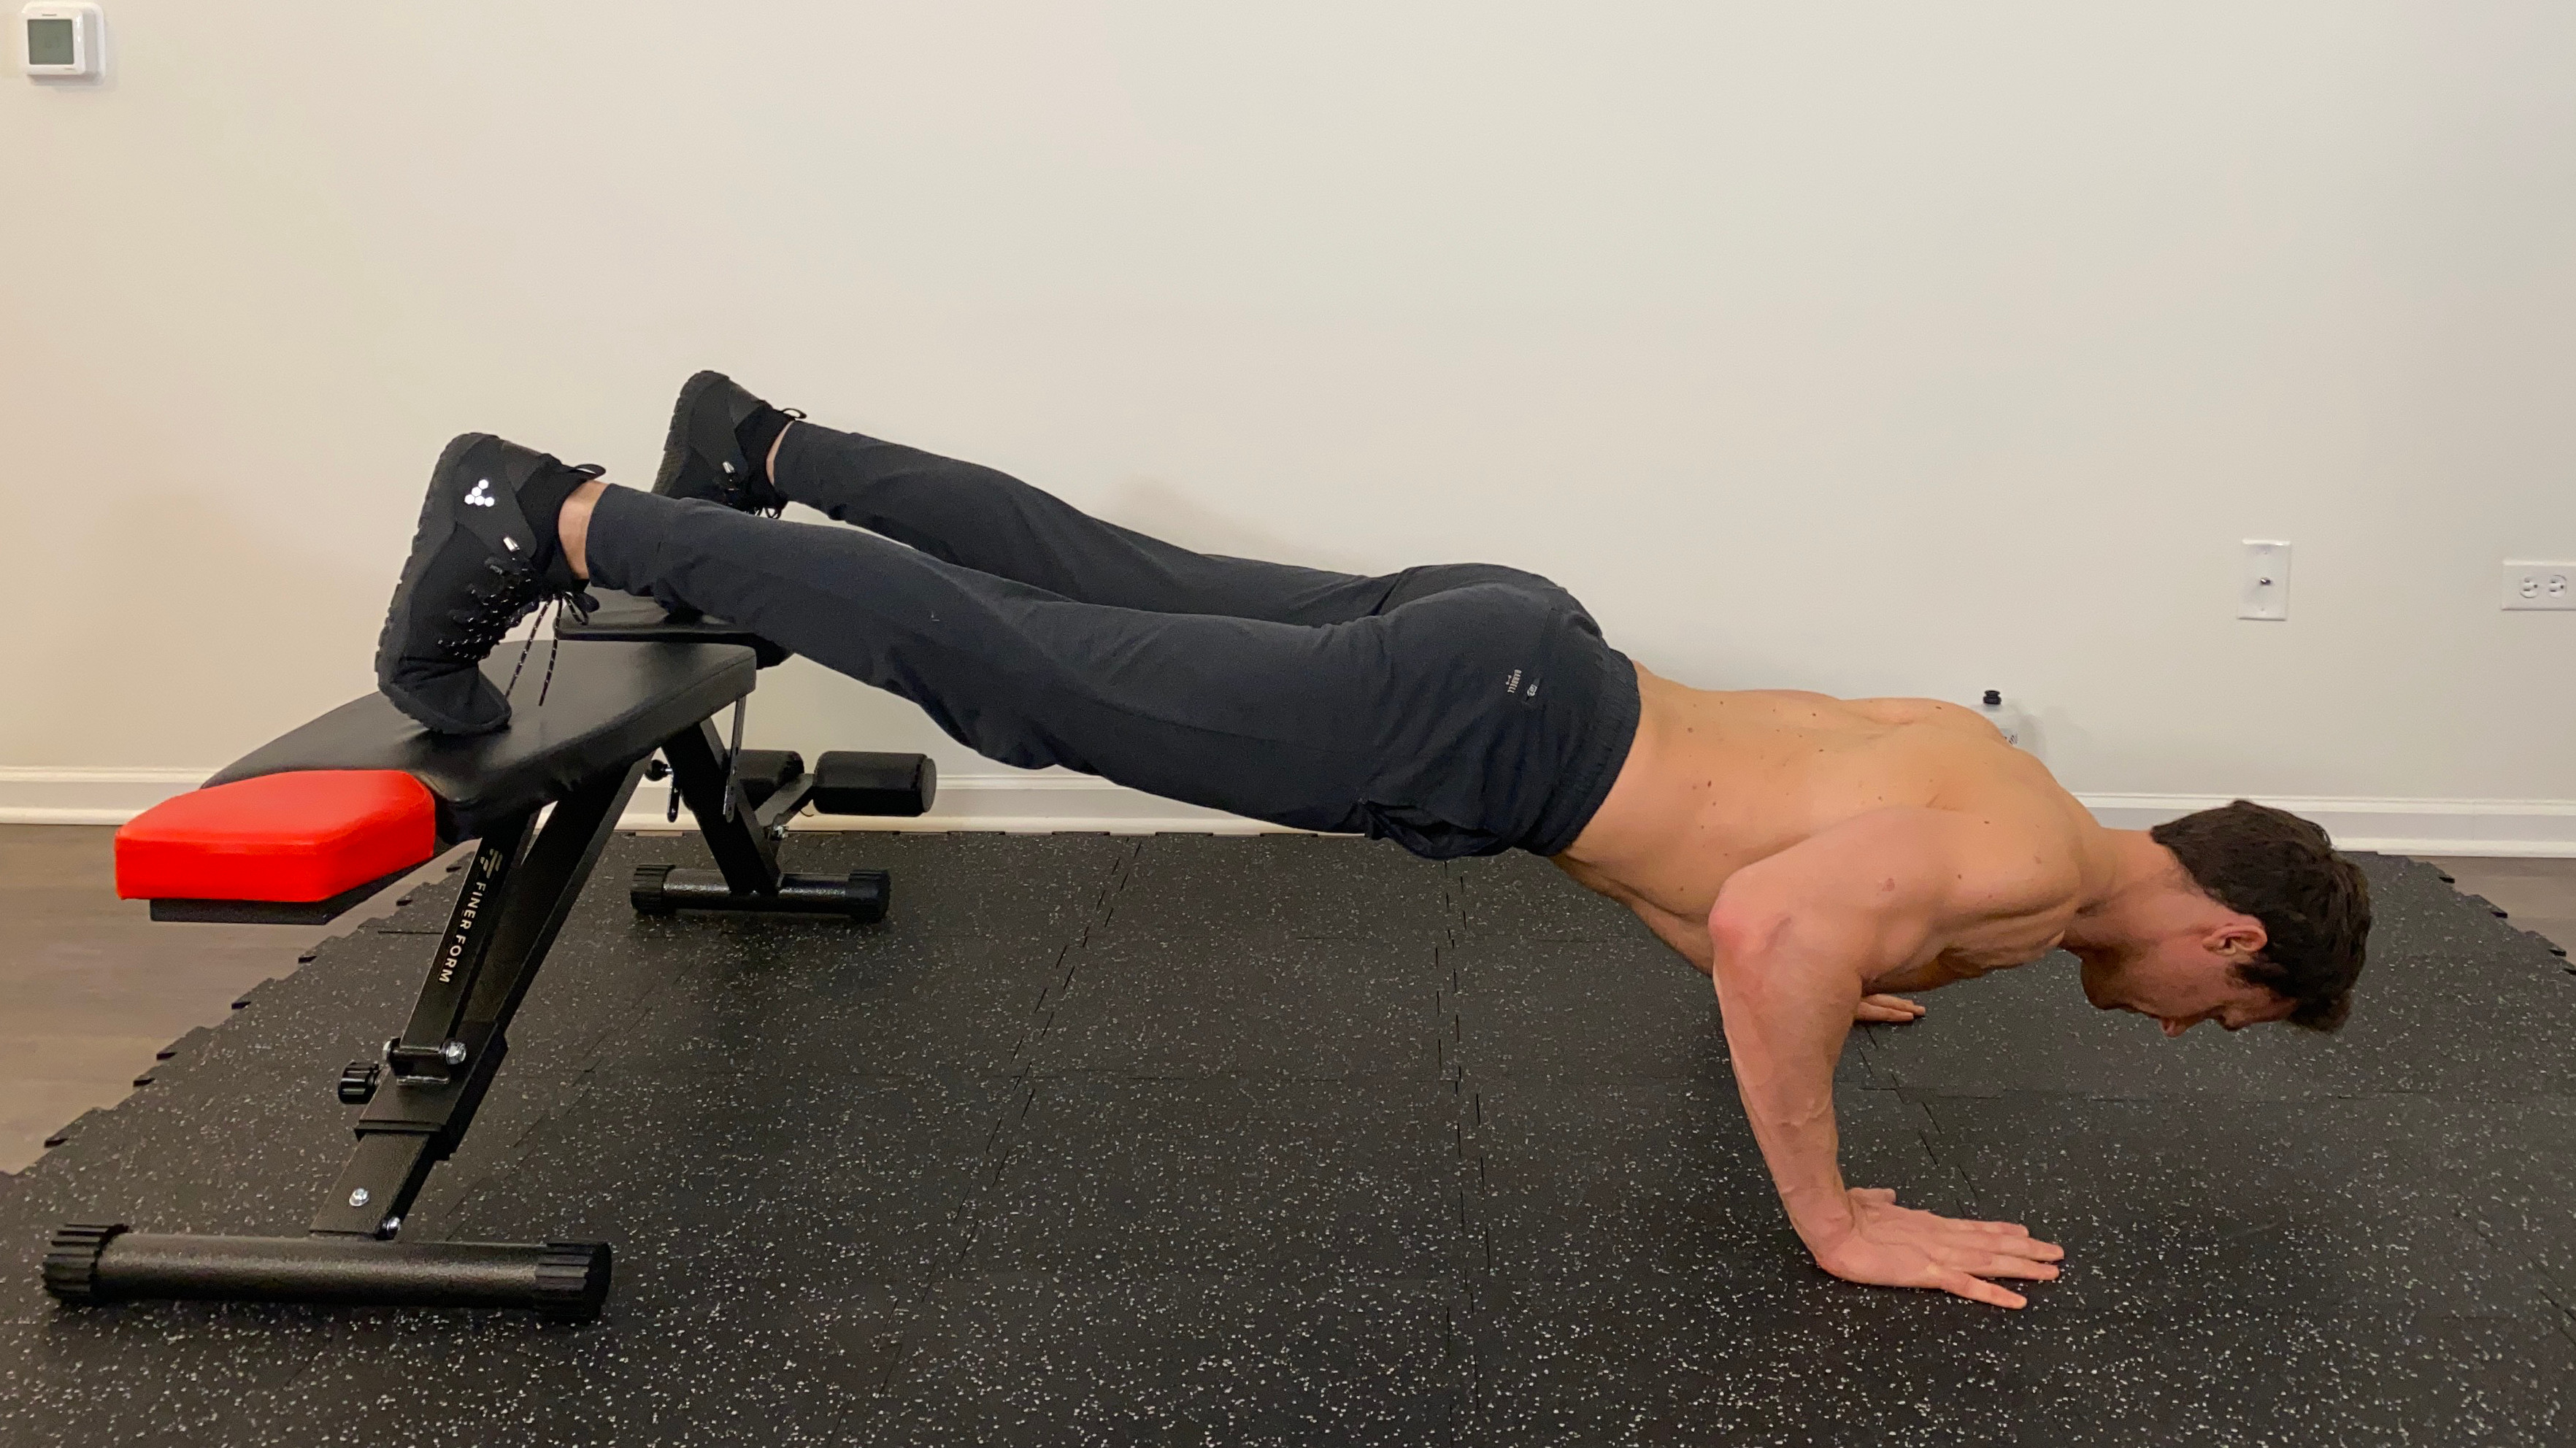 6 Pushup Variations For a Sculpted, Sexy Upper Body - Muscle